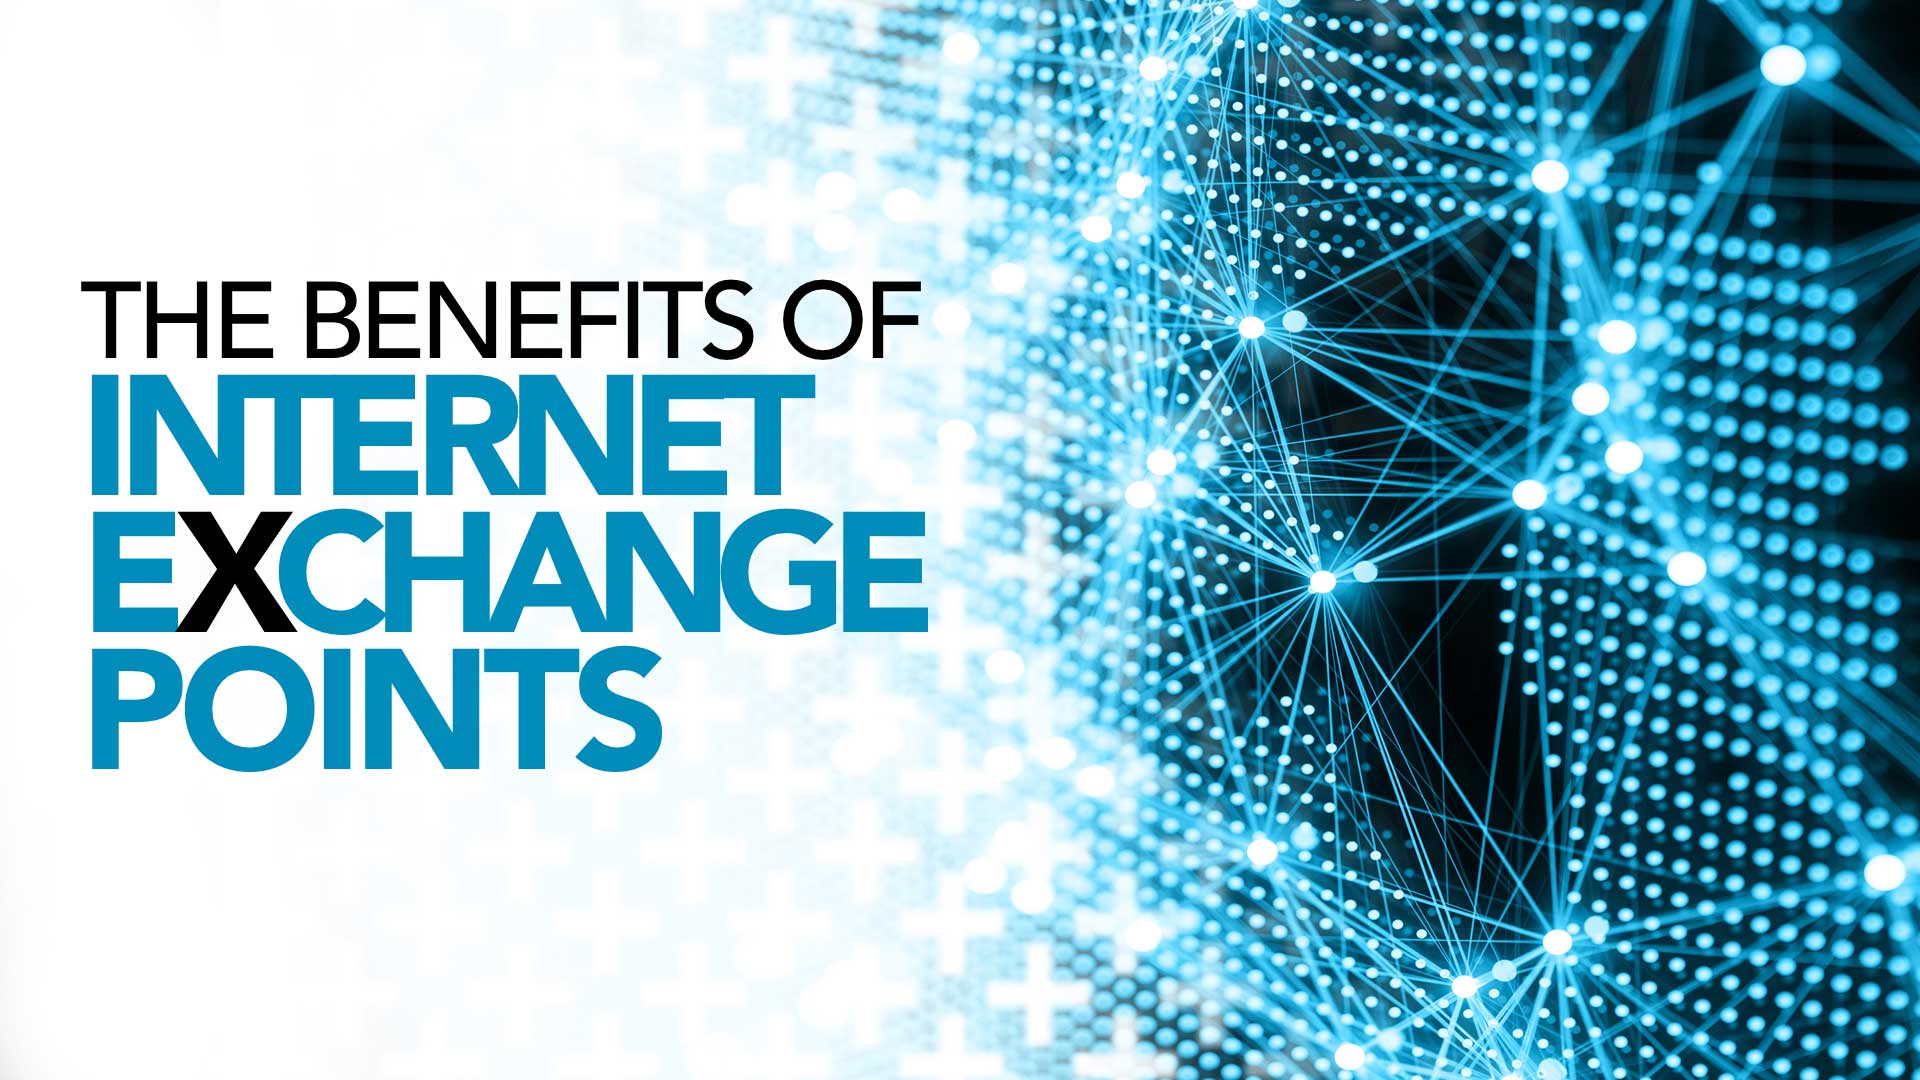 Internet exchange points and why they are beneficial title image